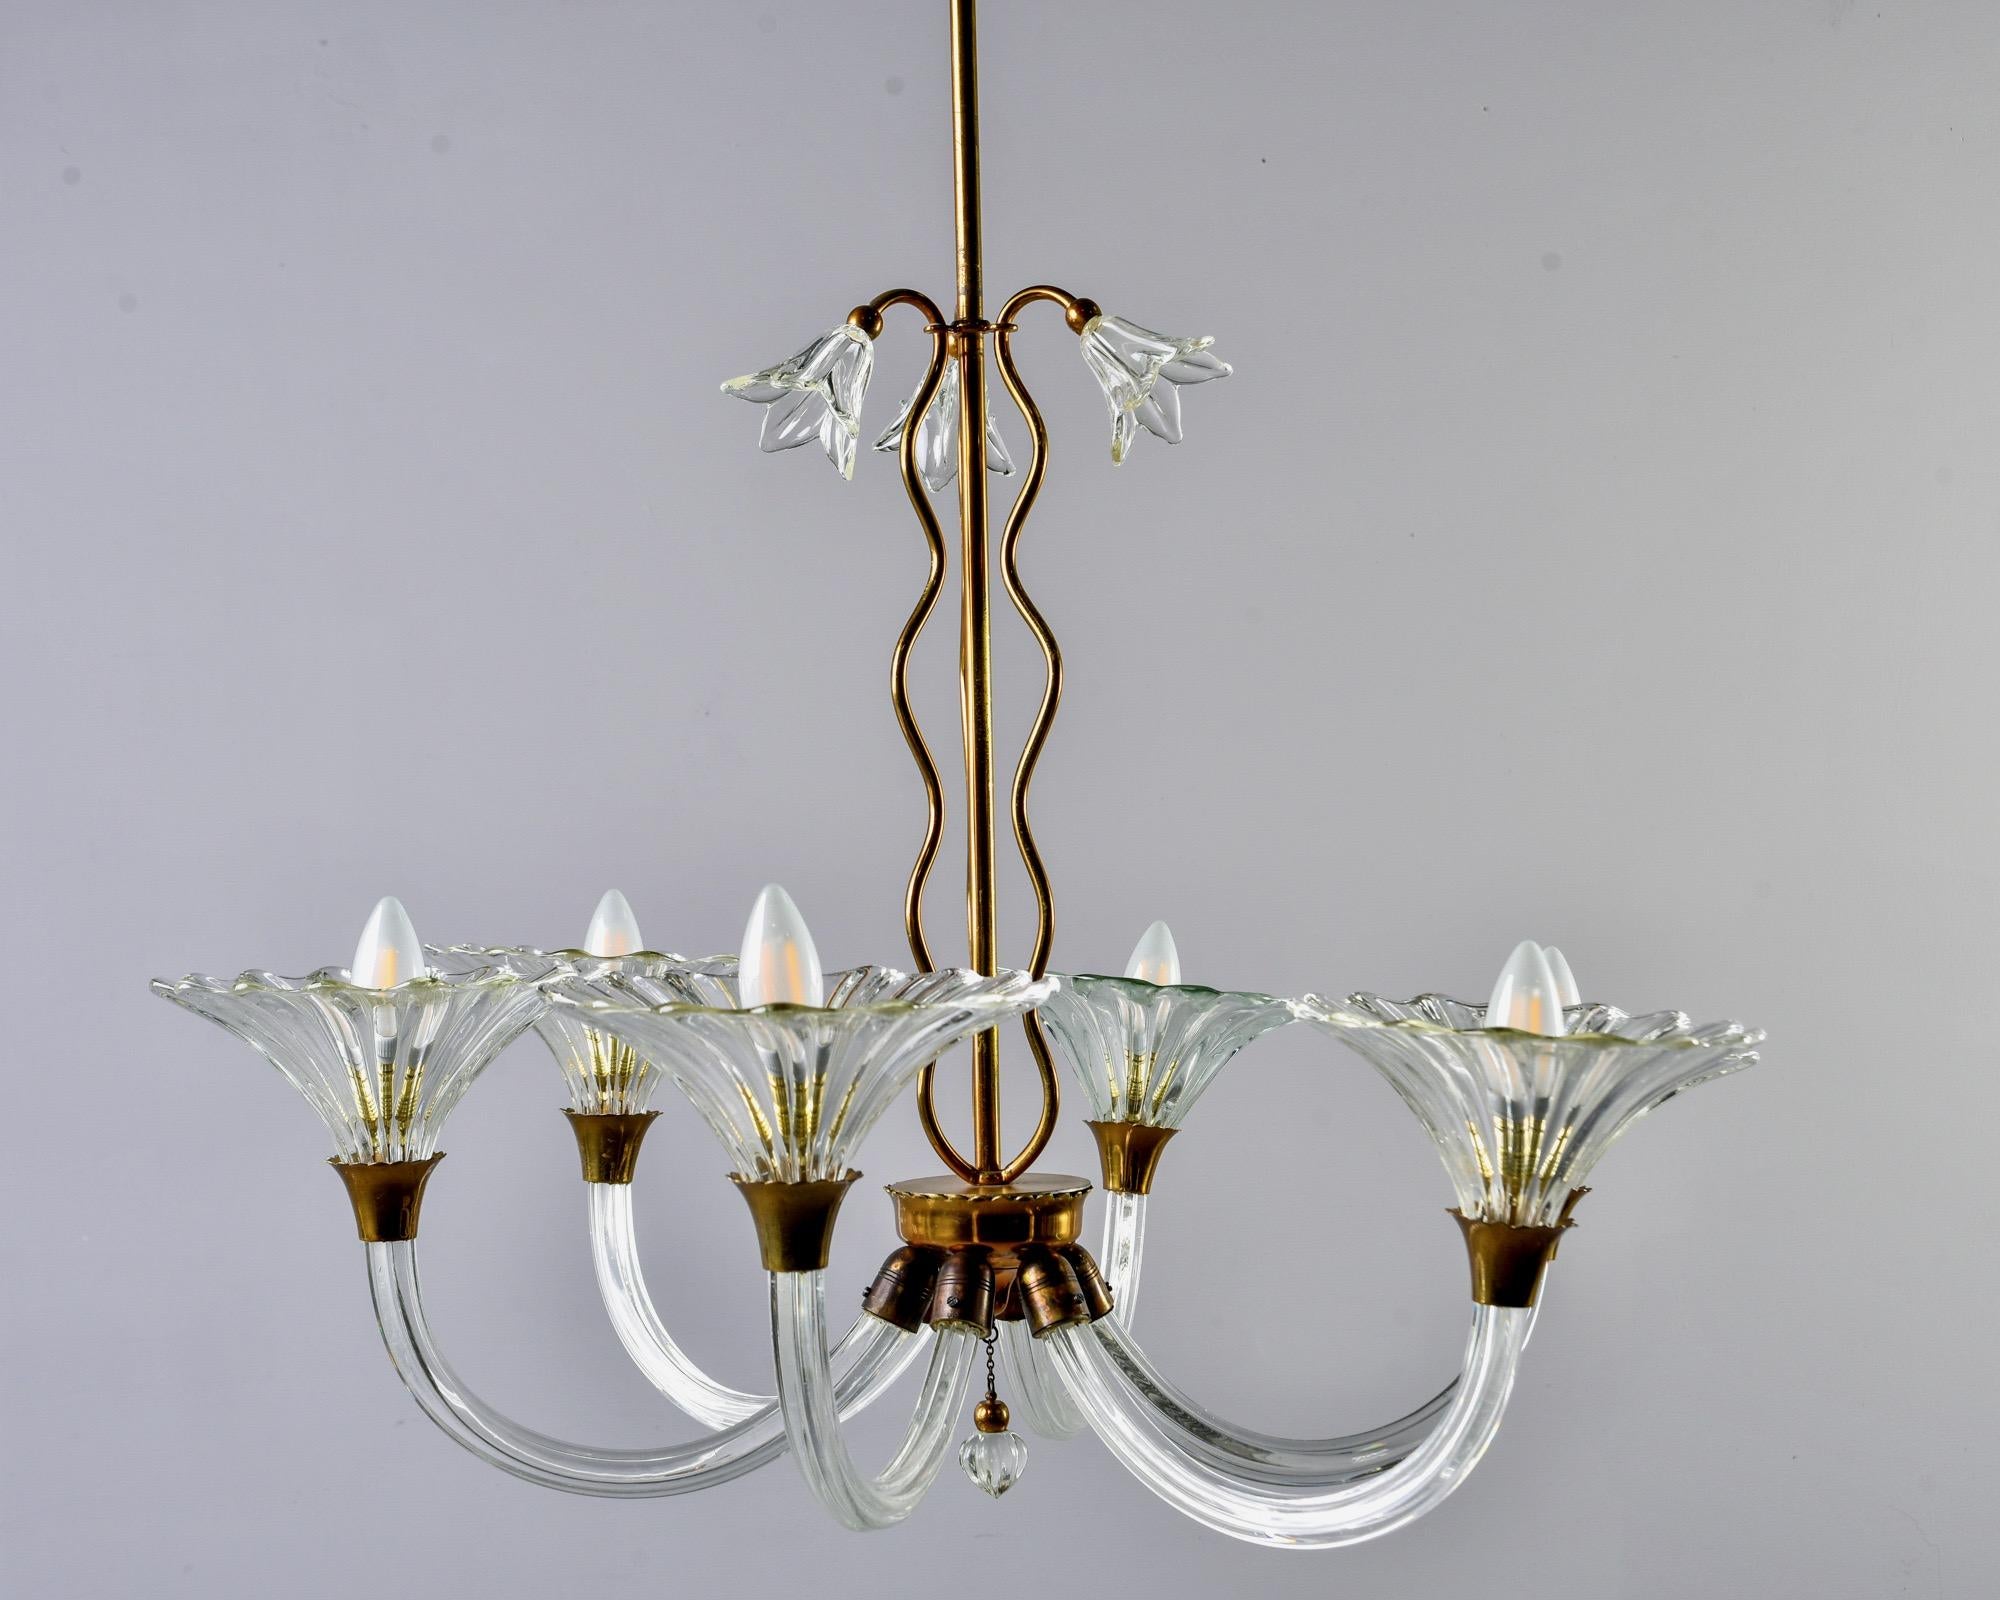 Six arm Murano glass chandelier attributed to Barovier and Toso circa 1930s. Original glass ceiling canopy, brass frame and clear mouth blown glass blooms at top. Six glass arms with mouth blown bobeches and standard sized sockets. New wiring for US